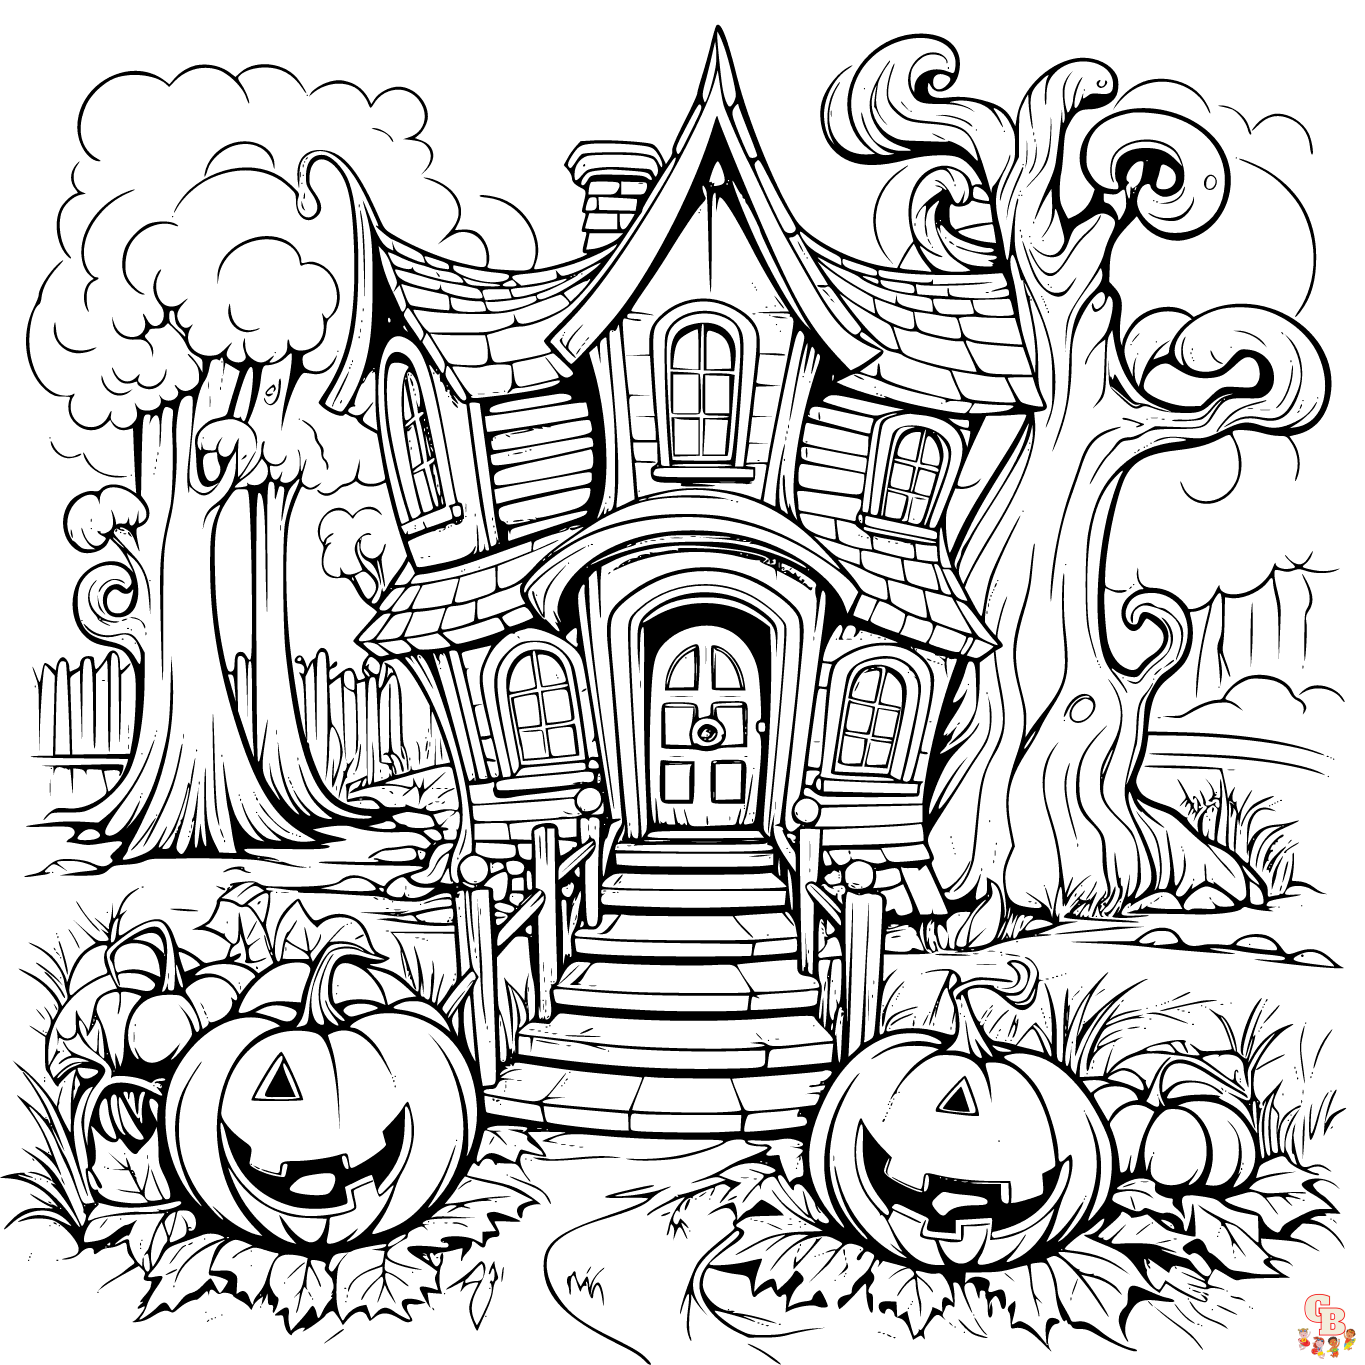 halloween coloring pages printable